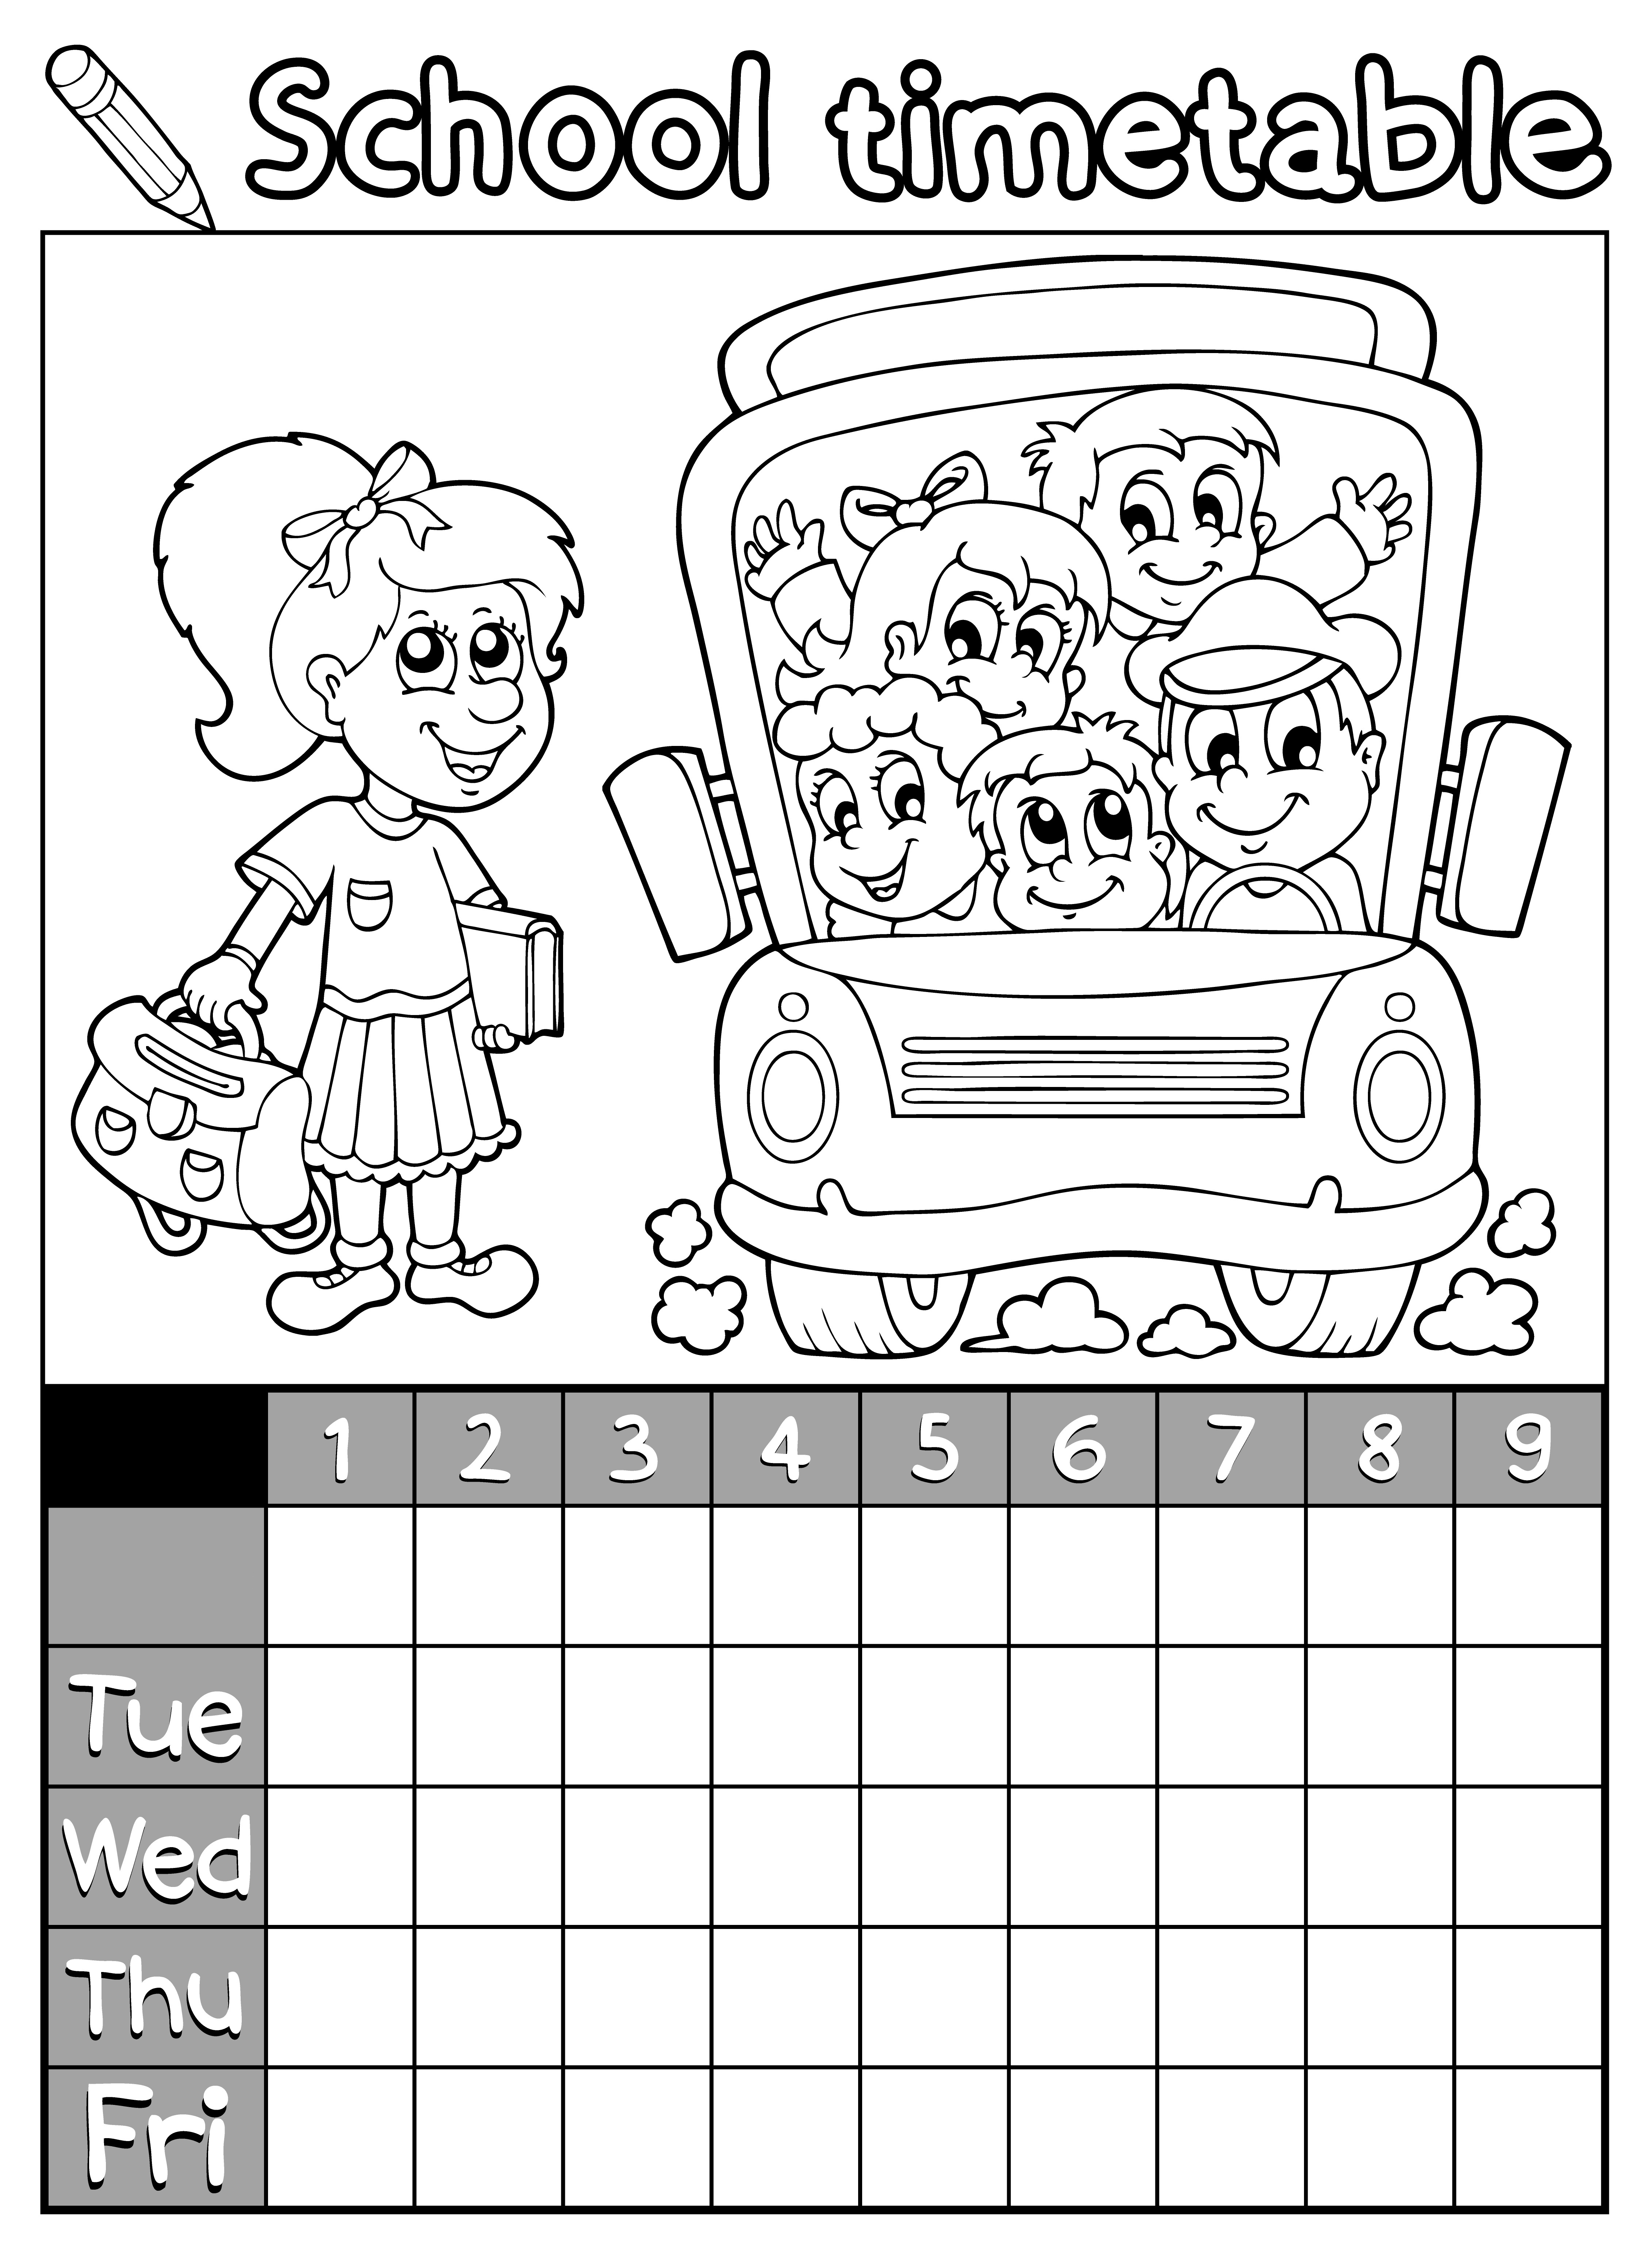 Coloring book school timetable 7 - eps10 vector illustration.